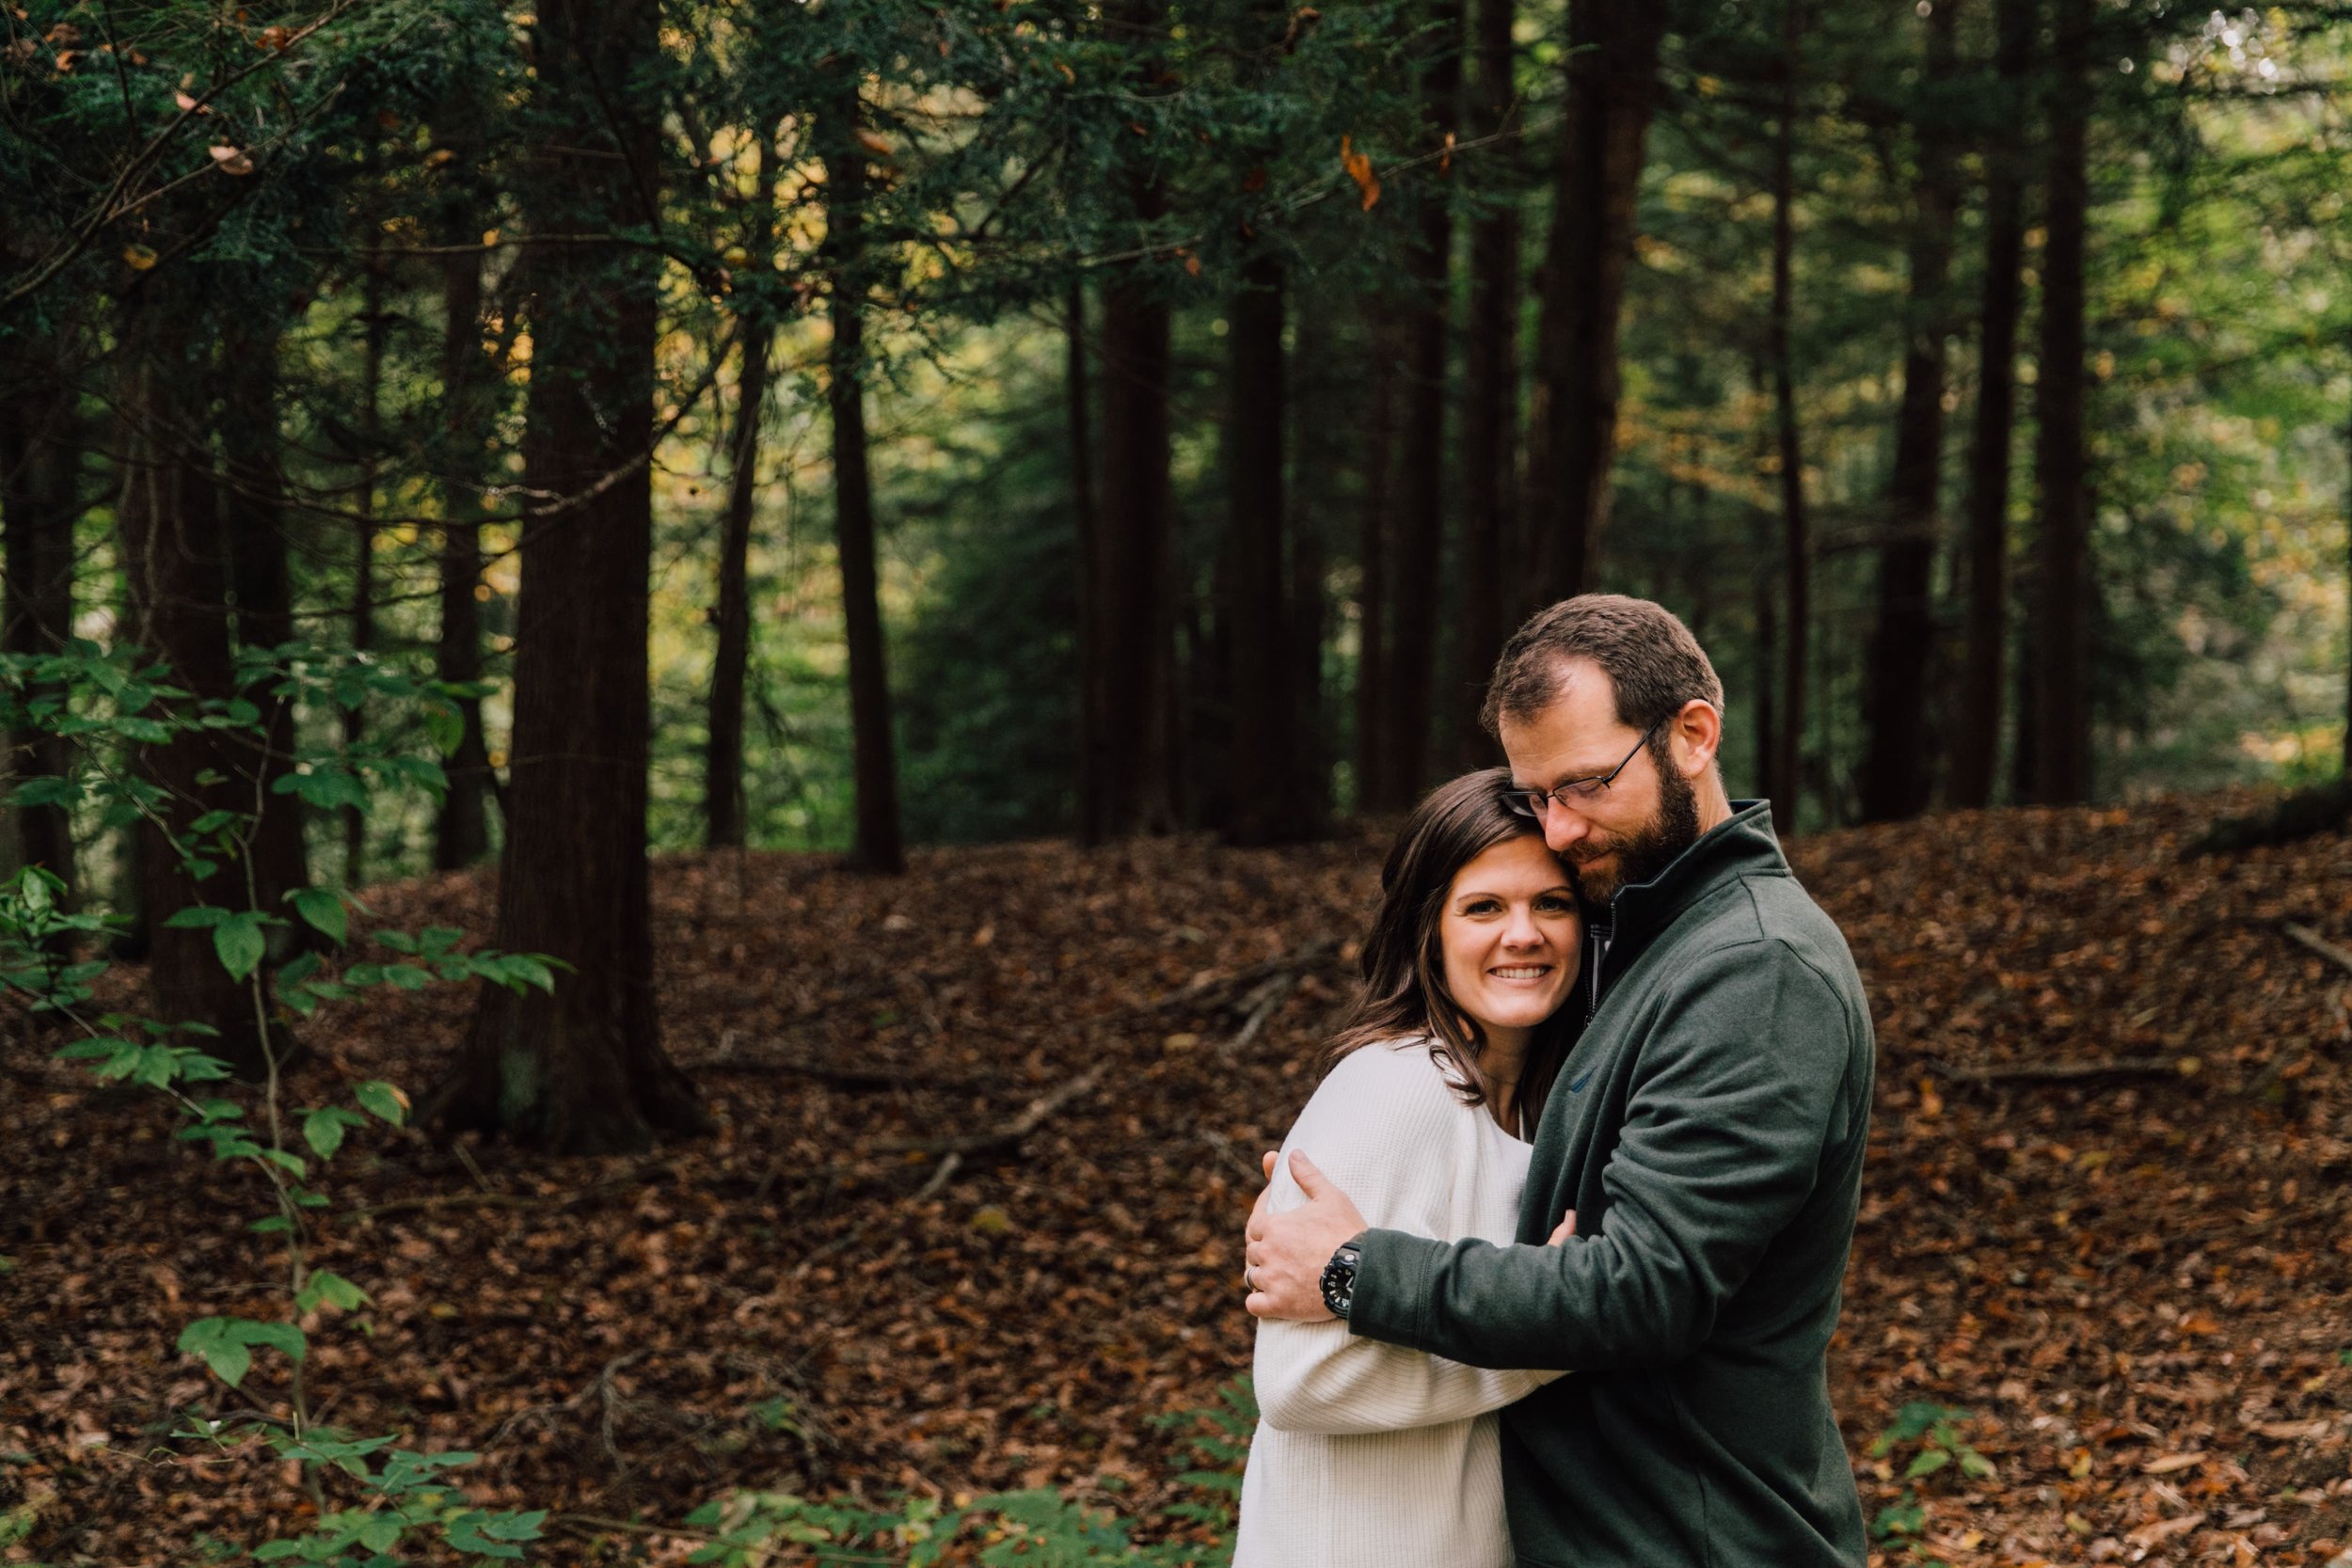  megan and barrett stand together on their wooded property in an embrace megan looks at the camera and smiles while barrett presses his face to her forehead with closed eyes during their couples photoshoot 